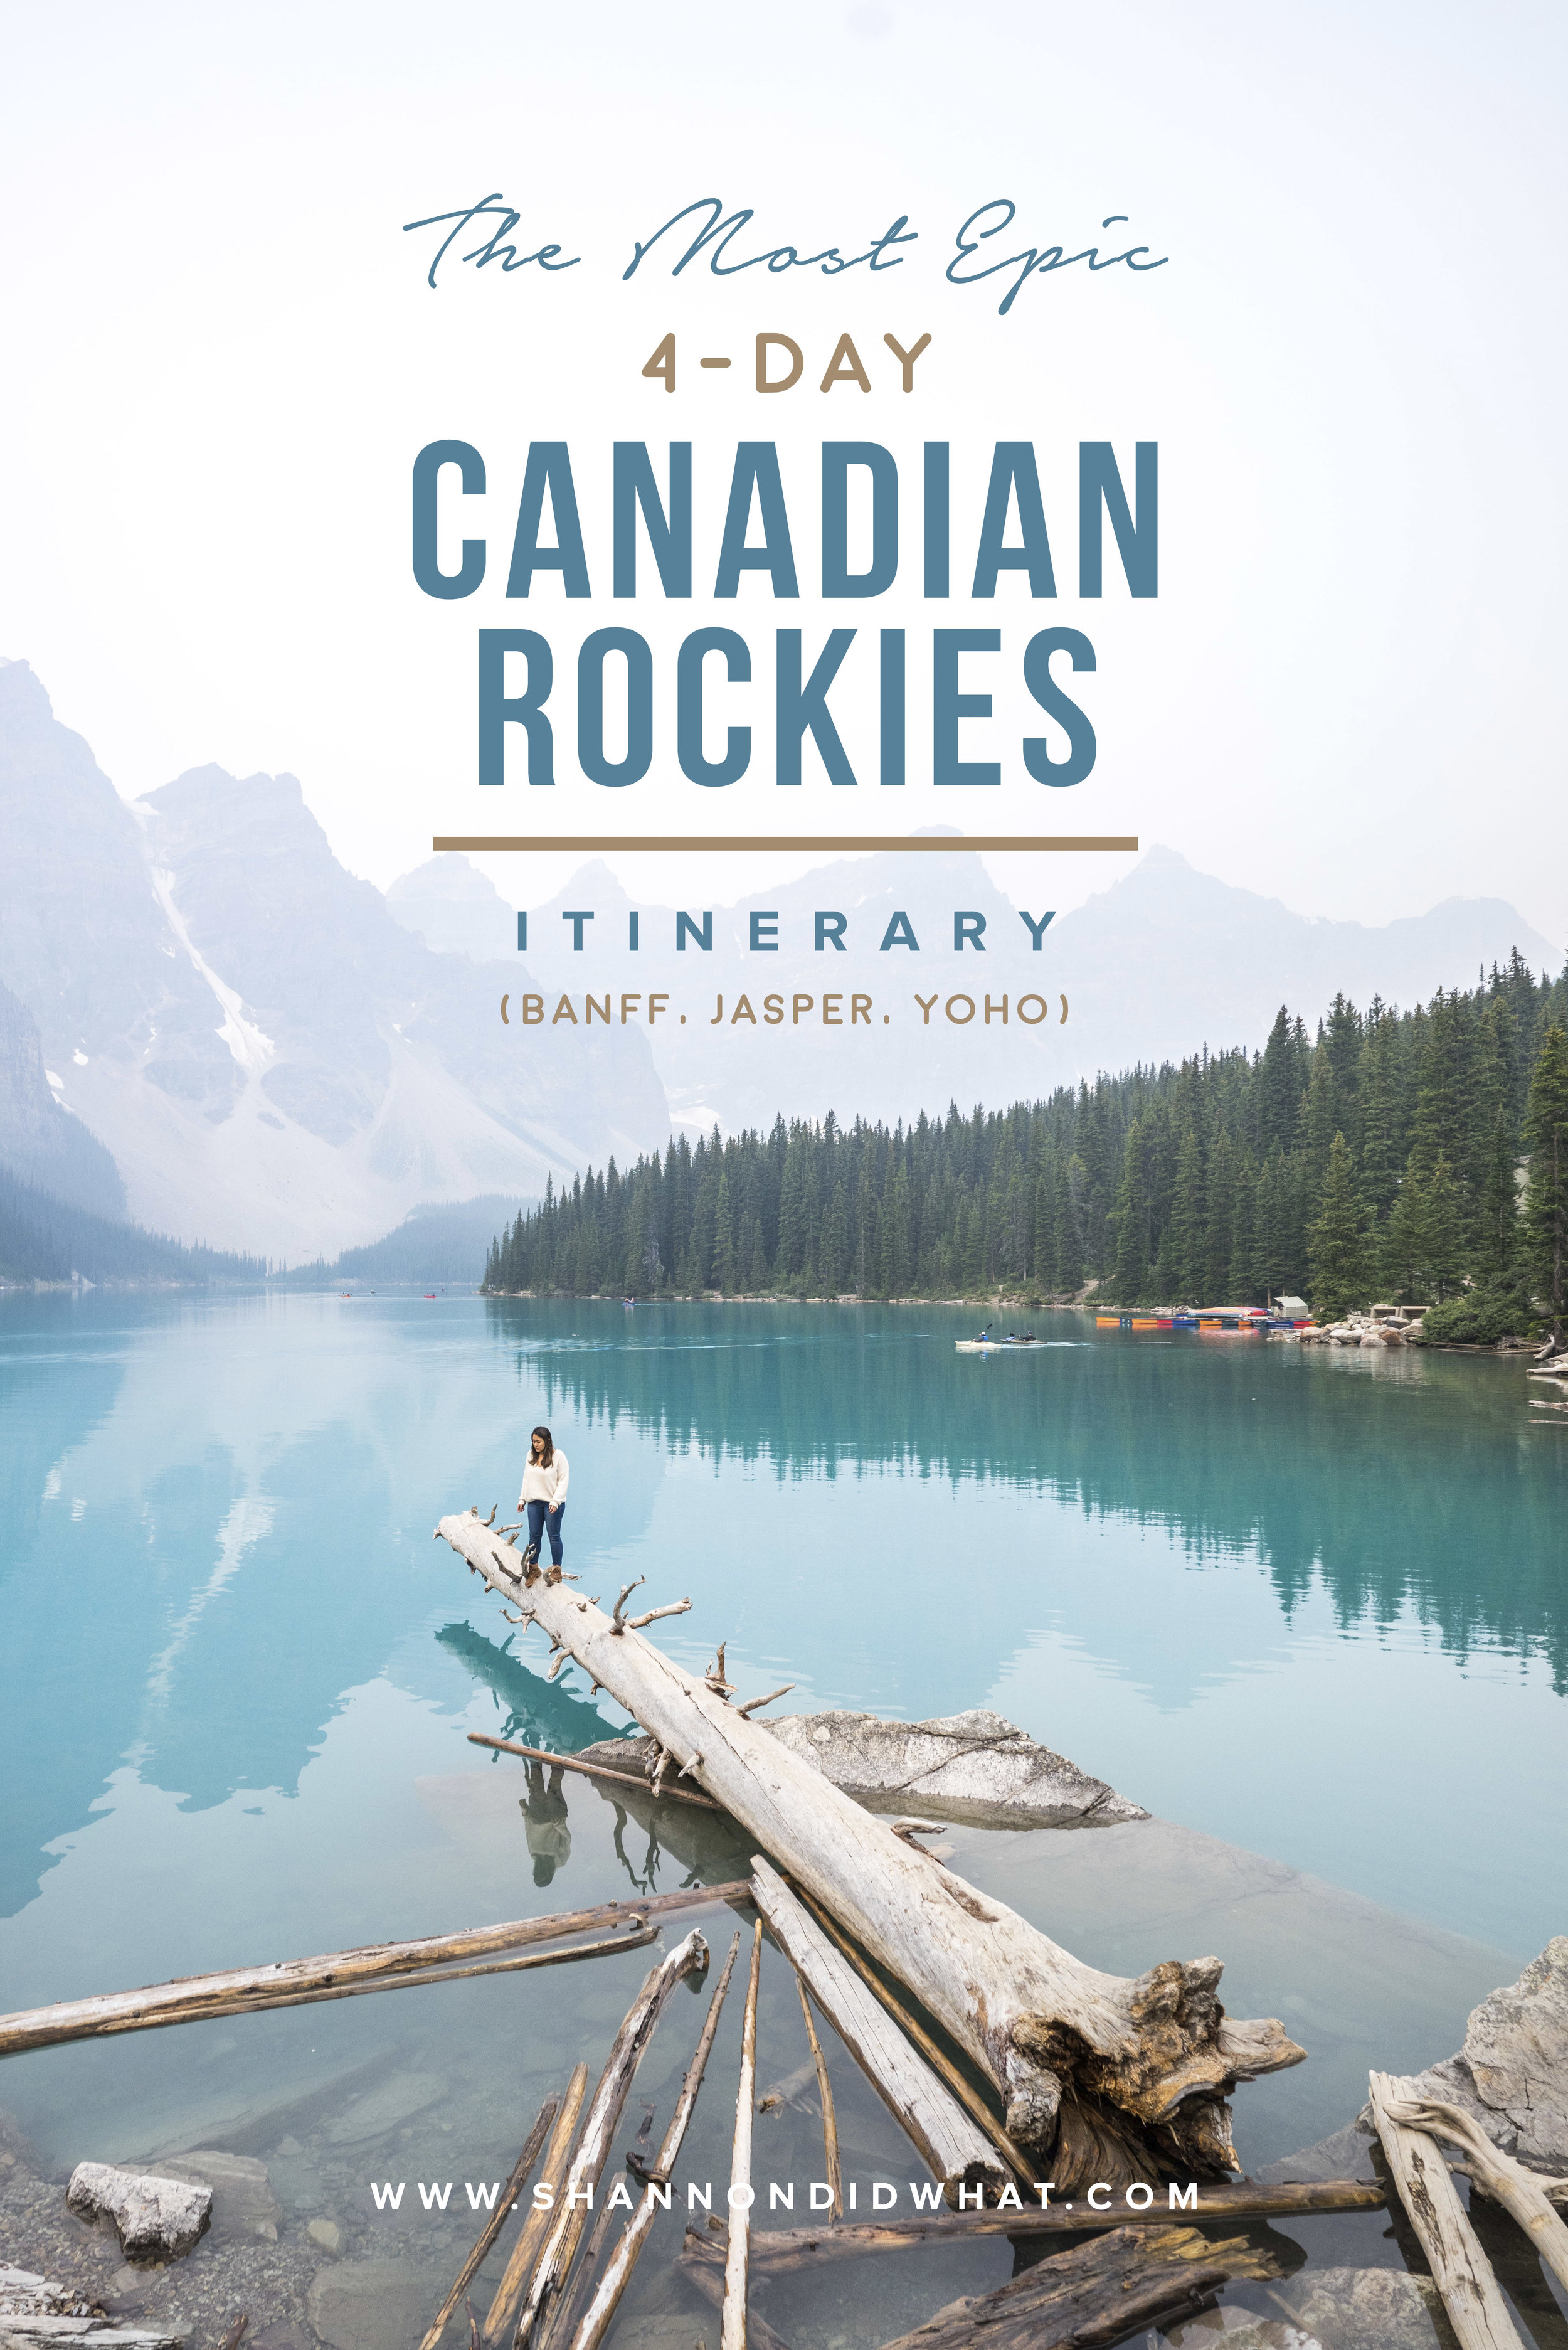 The Best 4-Day Canadian Rockies Itinerary, Banff National Park, Jasper National Park, Yoho National Park, Alberta, British Columbia, Canadian Rockies, Banff Itinerary, Jasper Itinerary